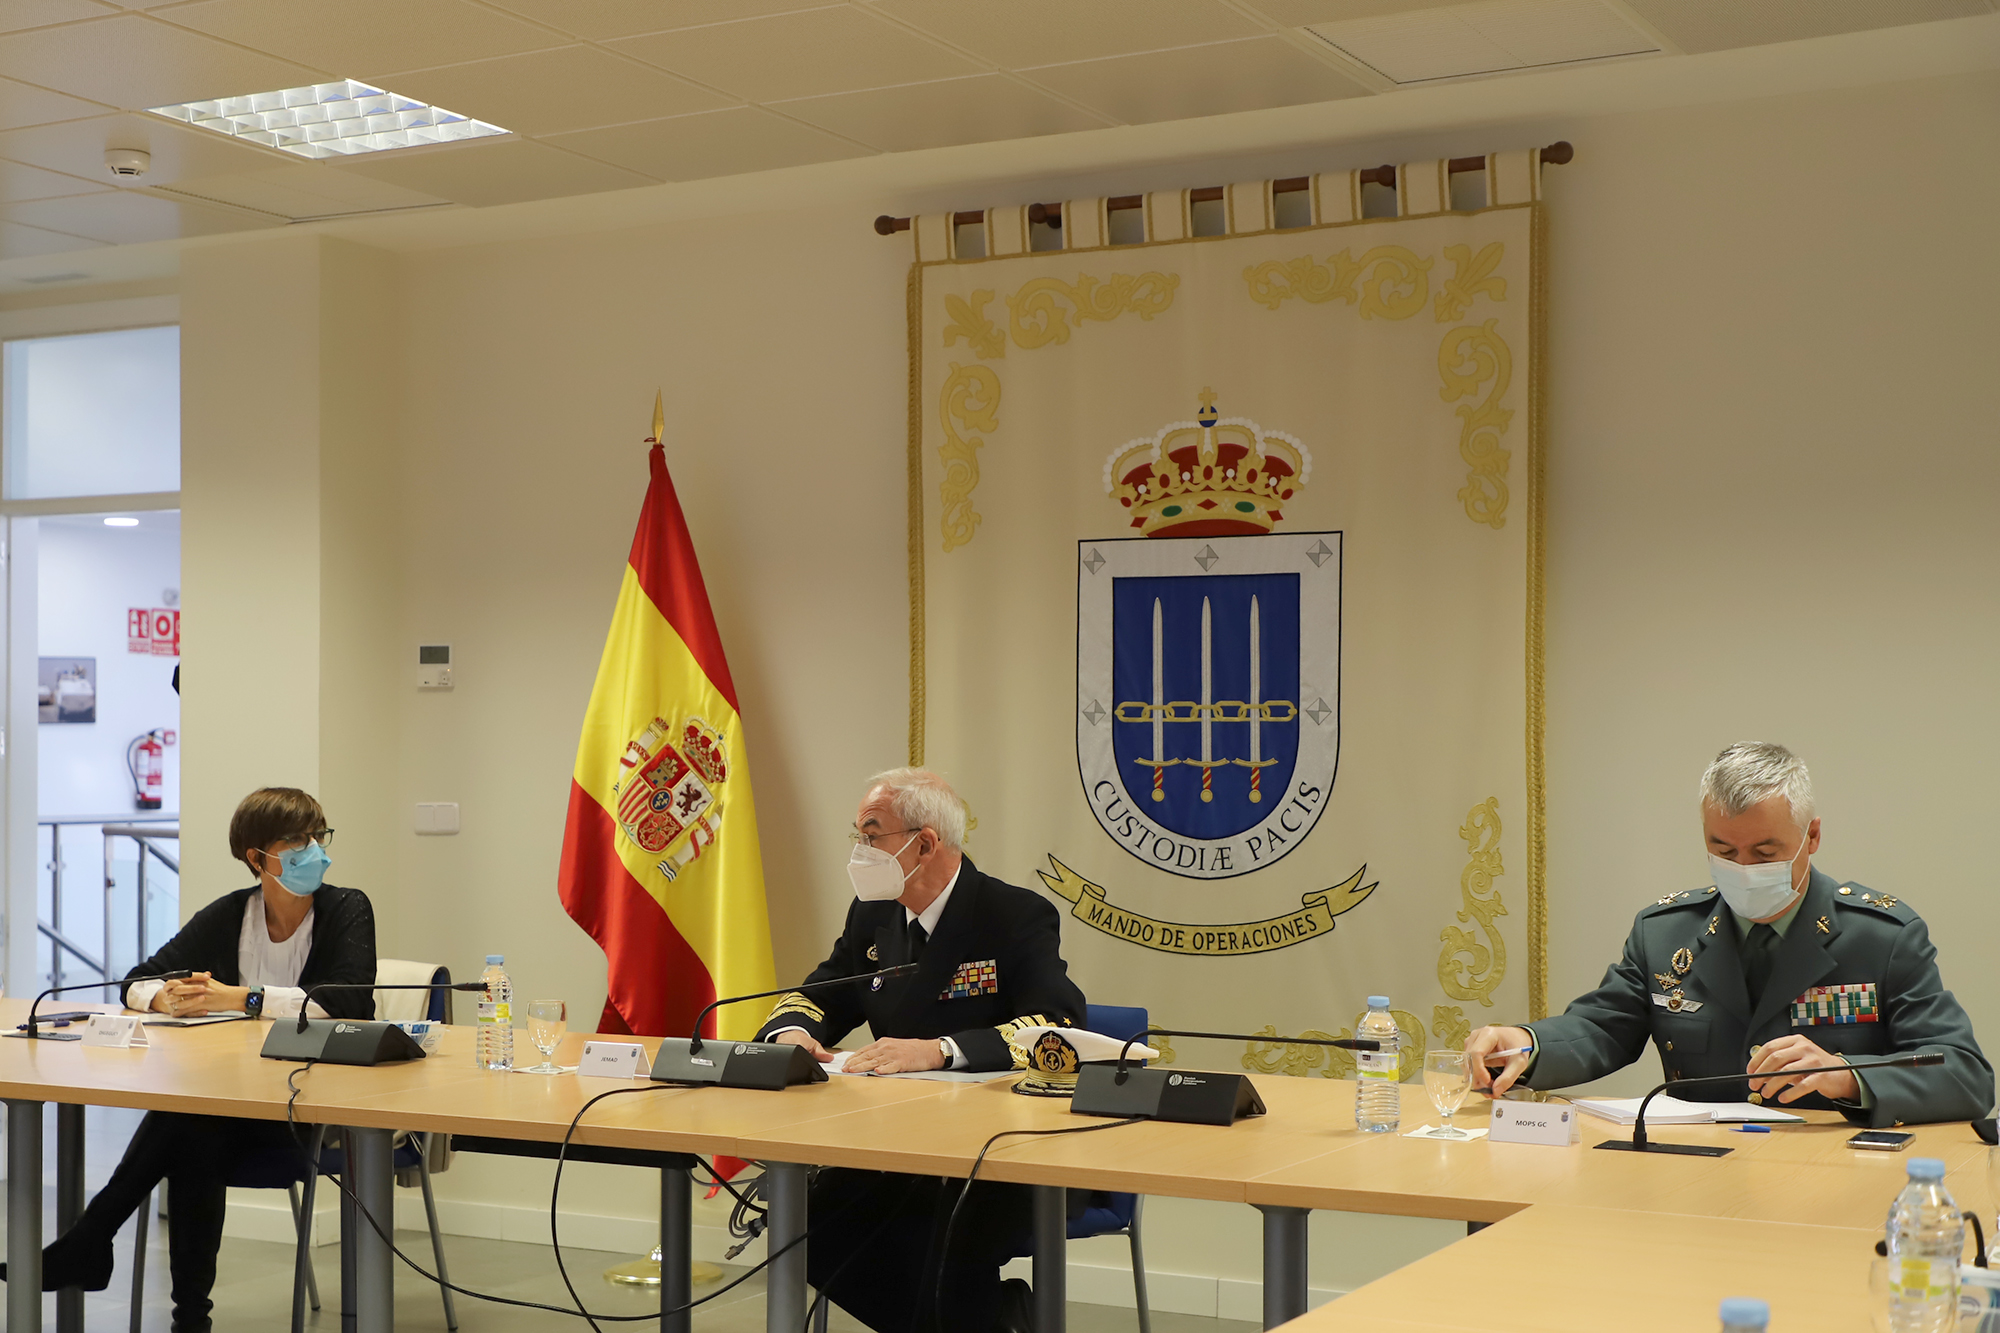 Director General of the Guardia Civil with the CHOD